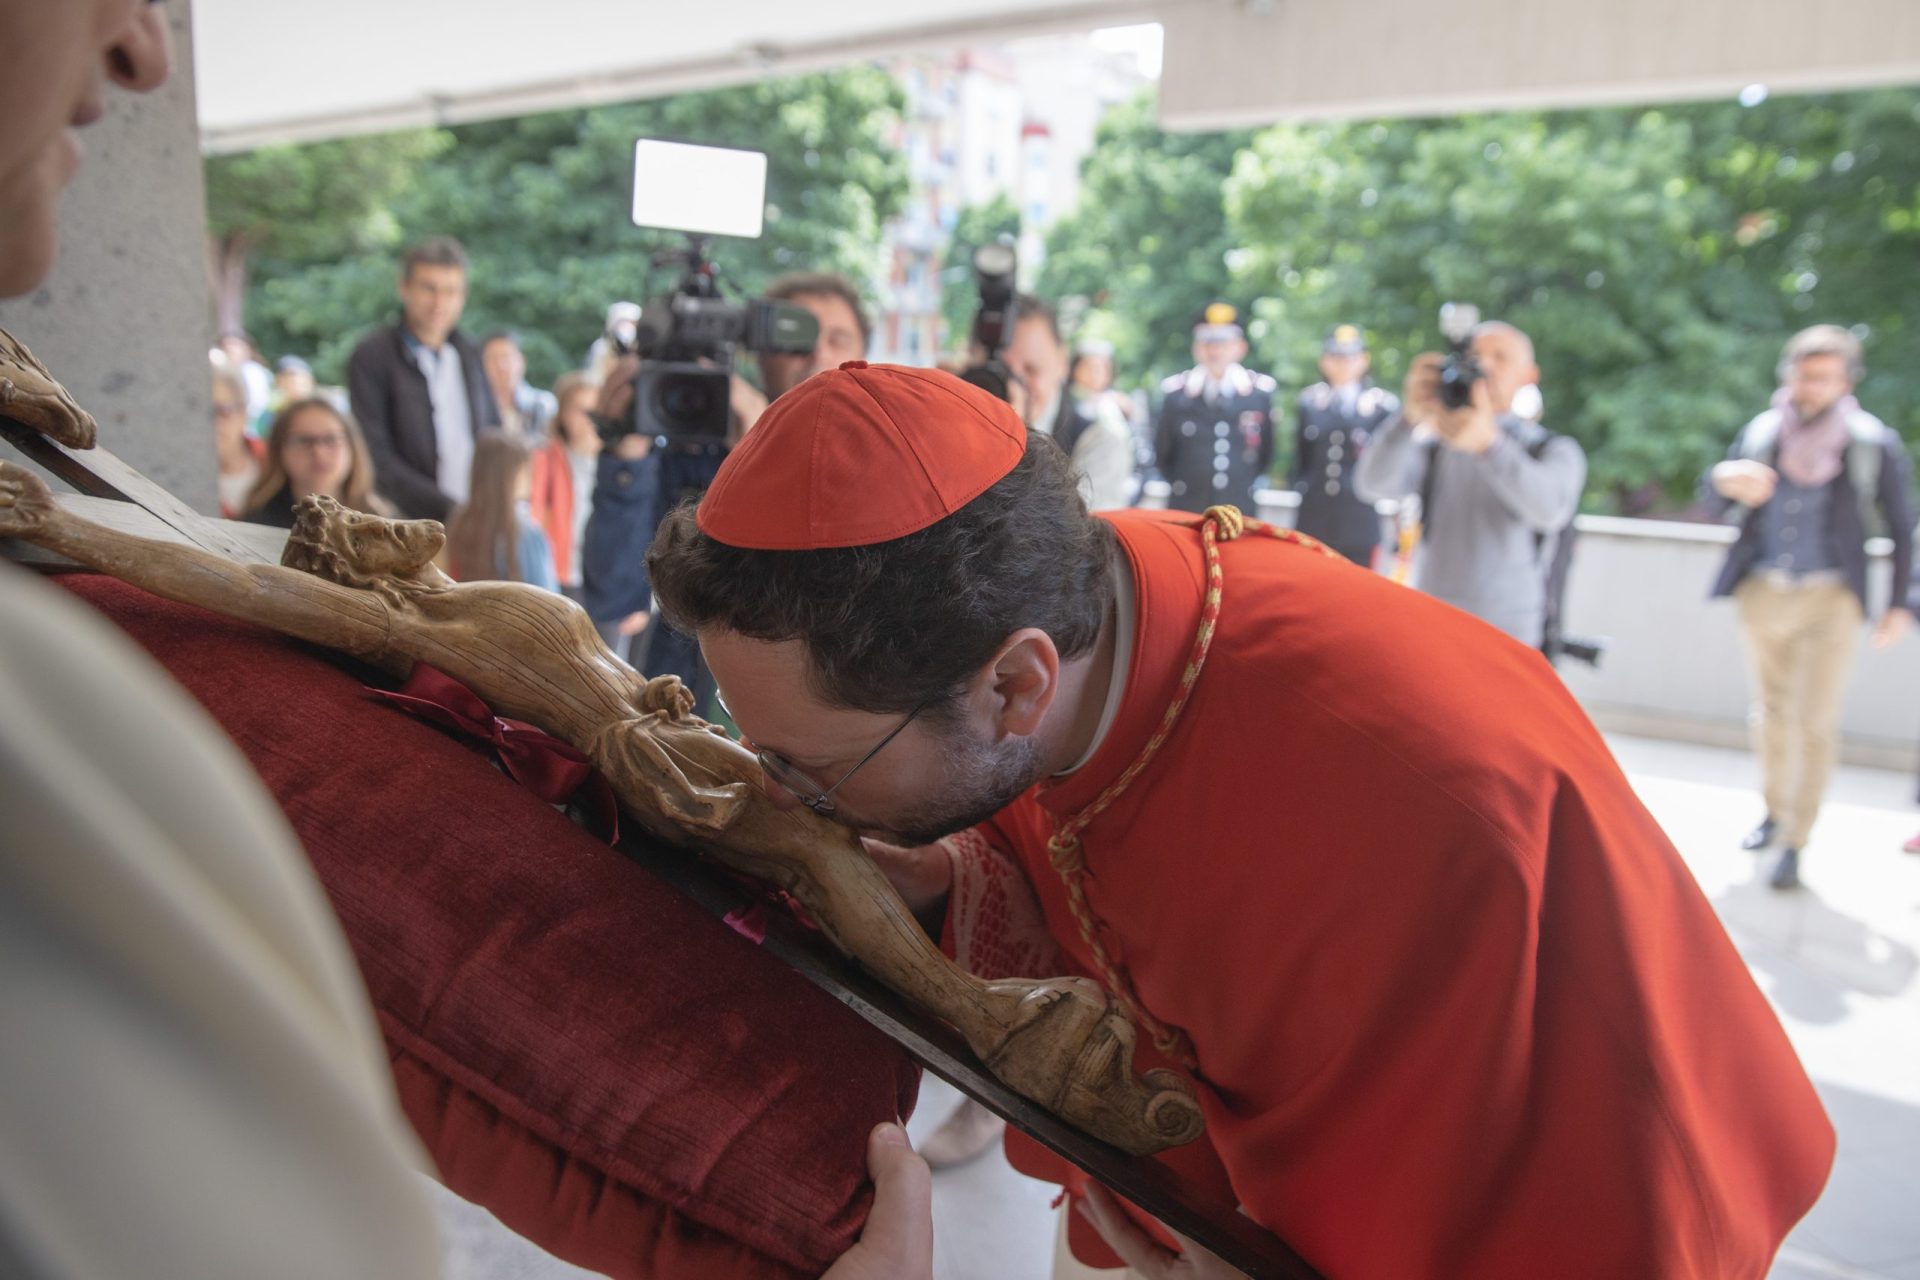 WHY DOES A CARDINAL FROM MONGOLIA NEED A TITULAR CHURCH IN ROME?